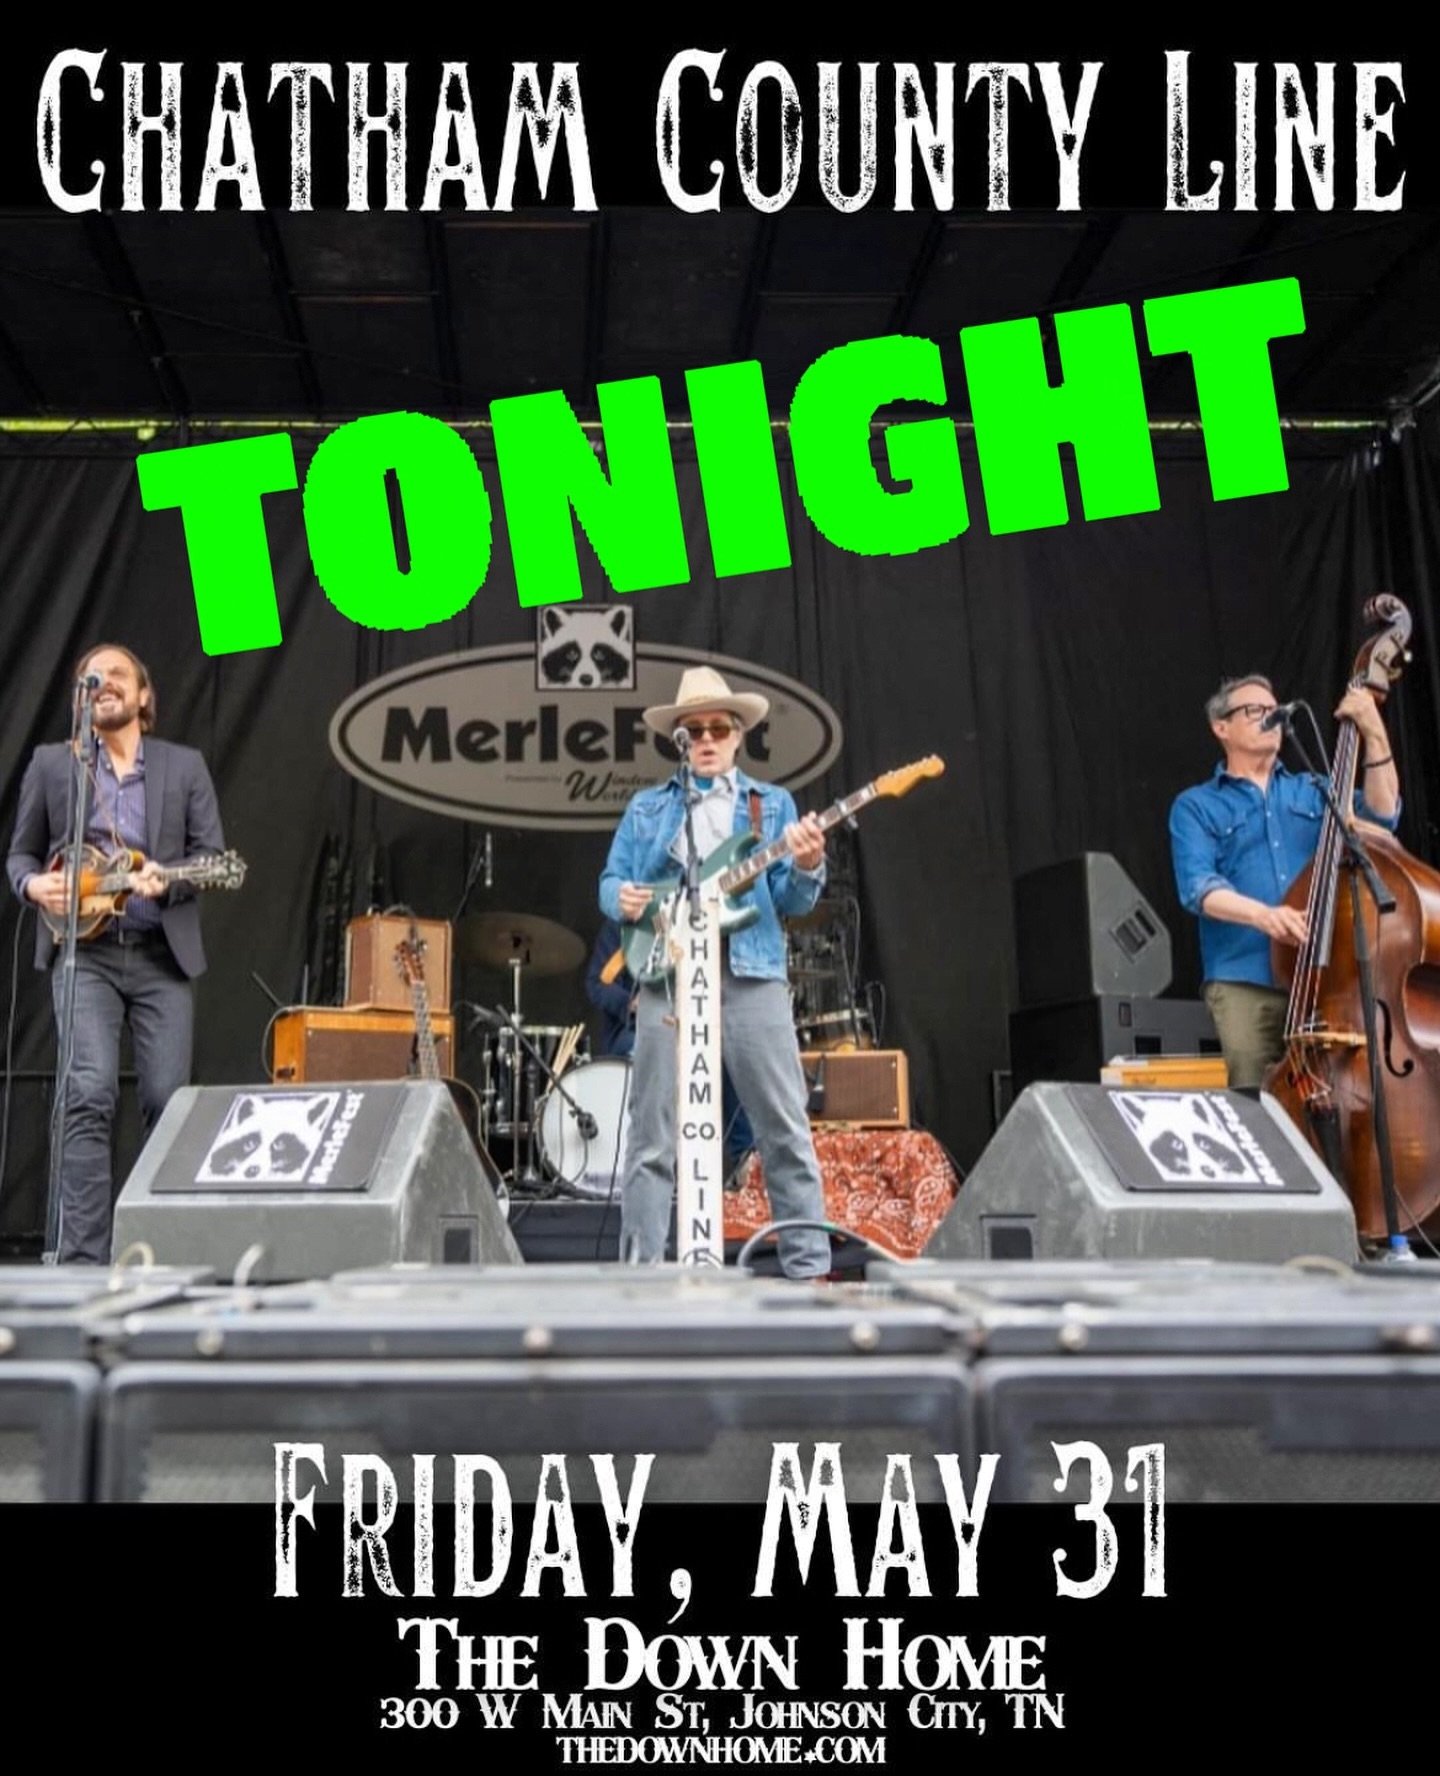 🚨TONIGHT! We&rsquo;re performing at @thedownhome in Johnson City, TN tonight Friday, May 31. Show at 8pm. See you soon!✌️

🎟️: thedownhome.com or chathamcountyline.com